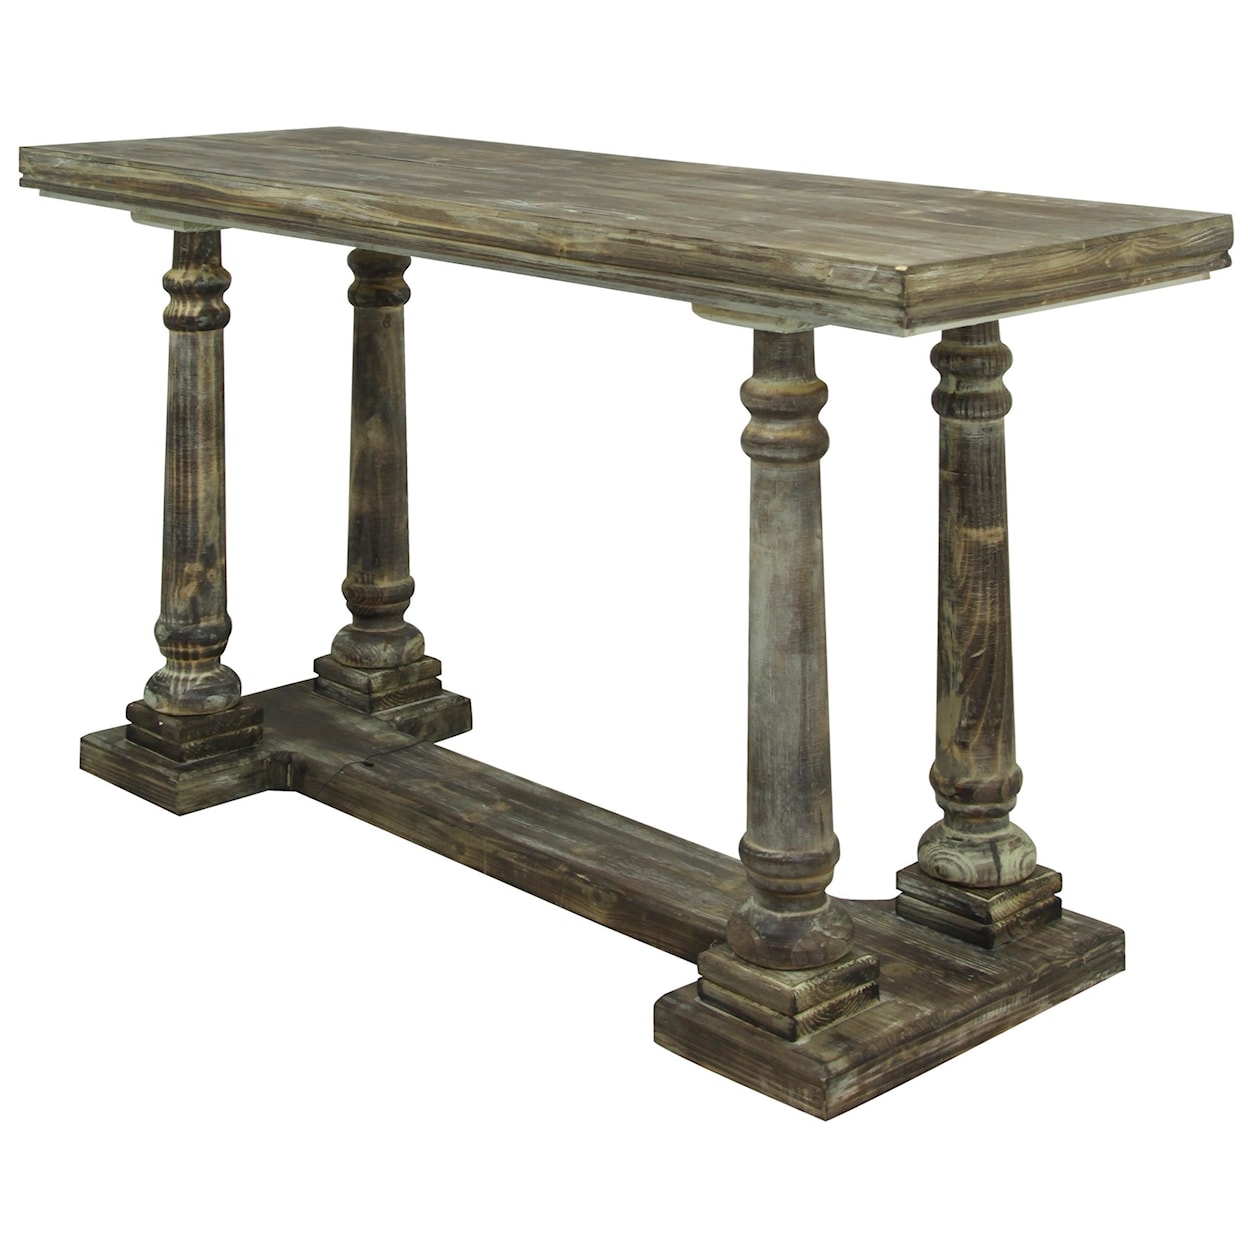 StyleCraft Occasional Tables Classic Console Table Of Driftwood